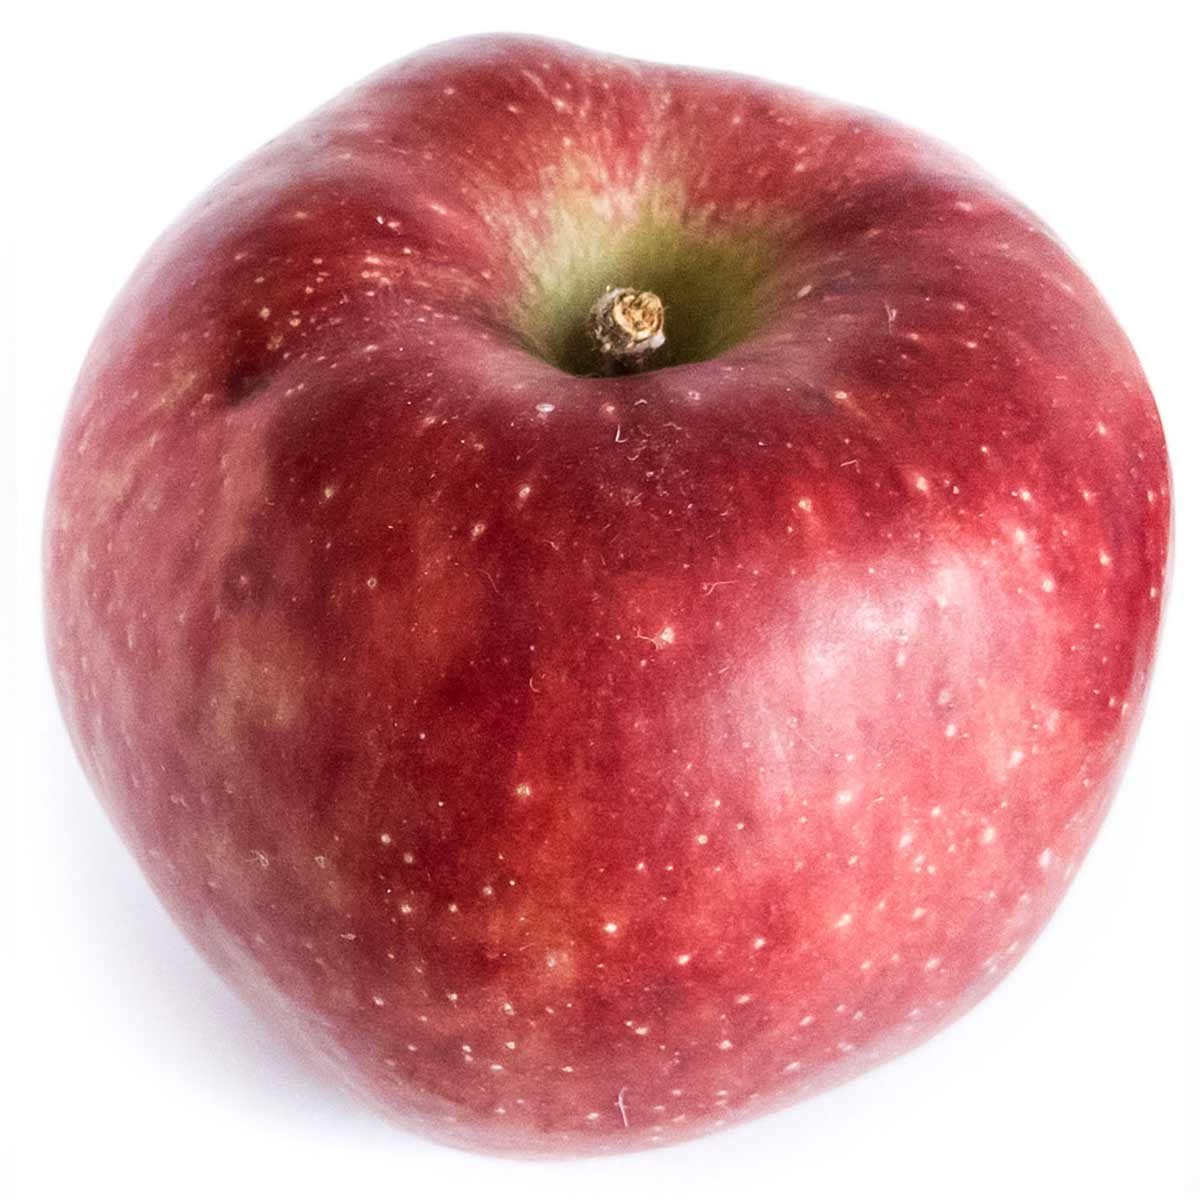 Red Delicious apple